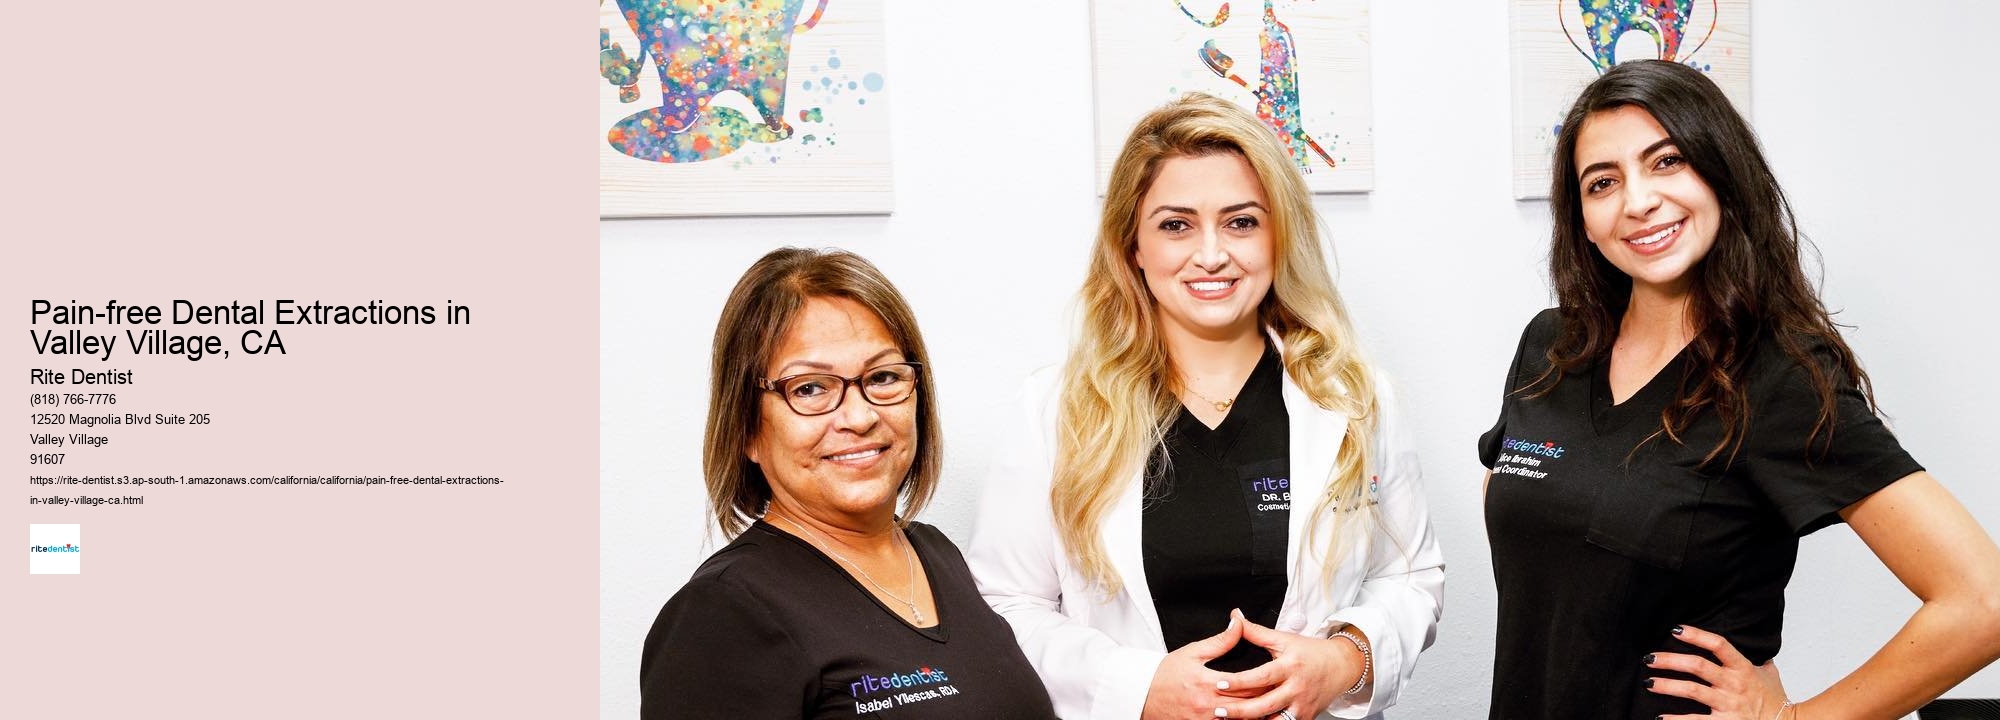 Pain-free Dental Extractions in Valley Village, CA